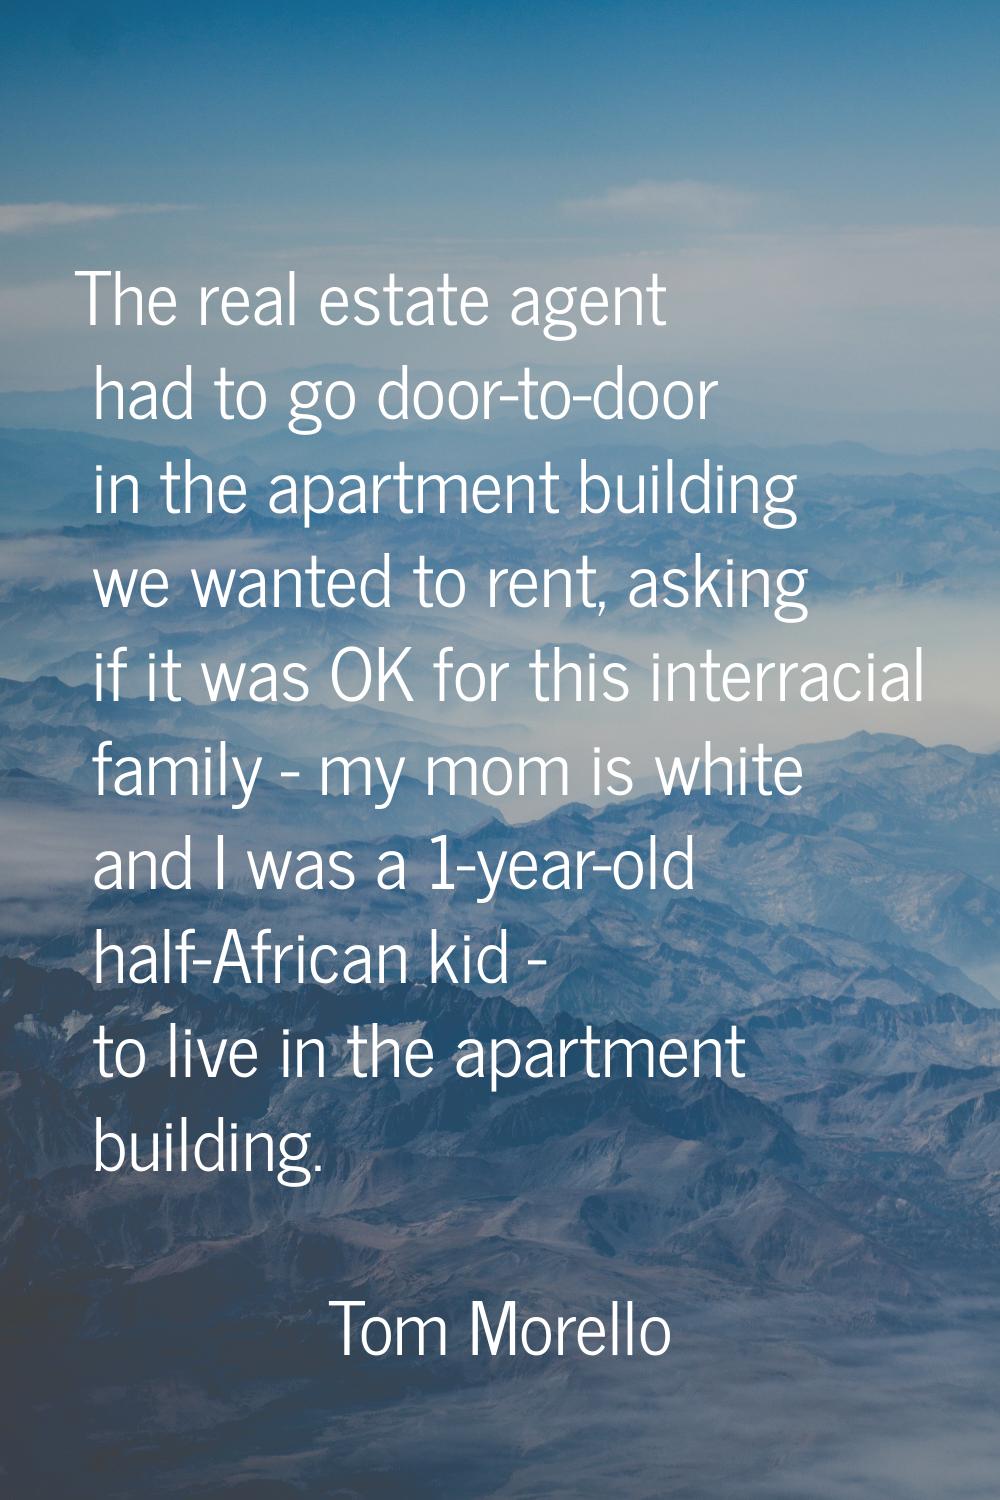 The real estate agent had to go door-to-door in the apartment building we wanted to rent, asking if